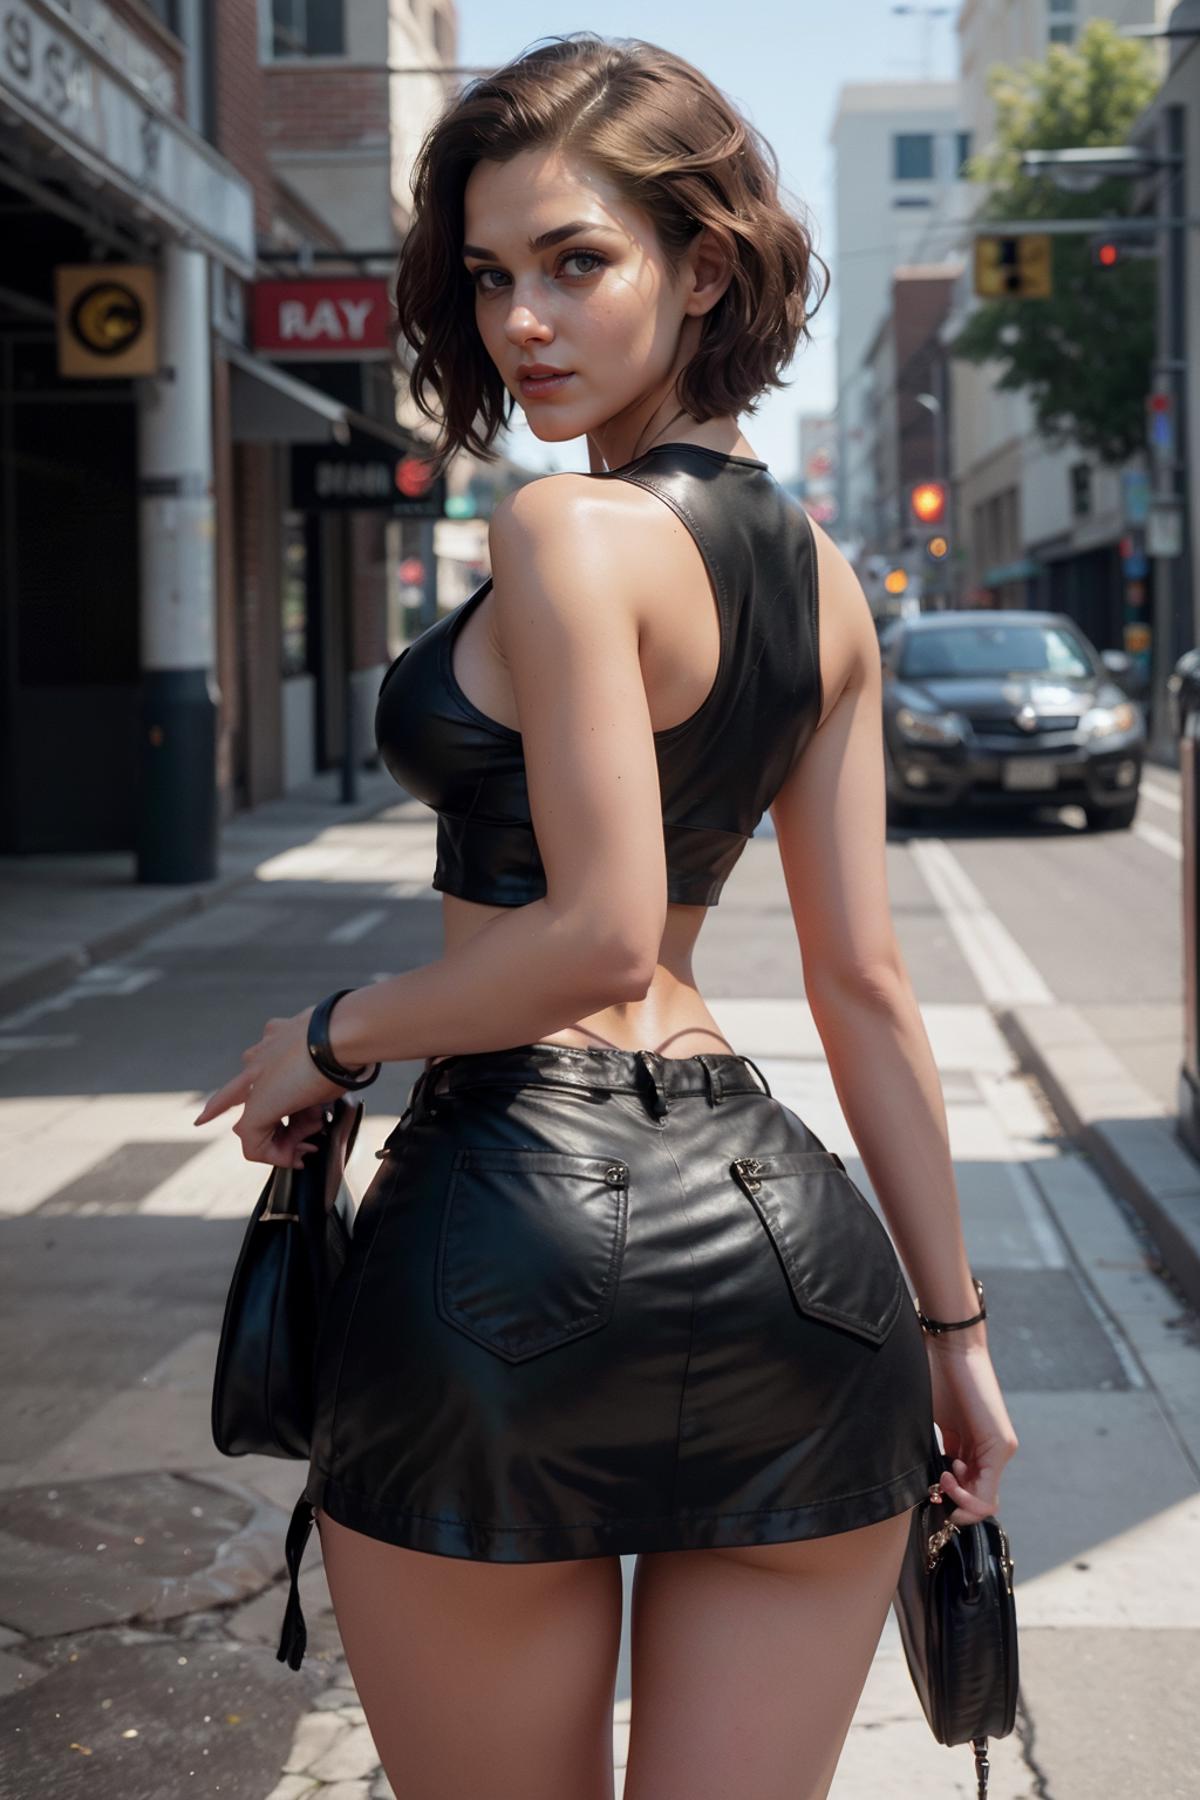 A woman wearing a black leather outfit is walking down a city street.